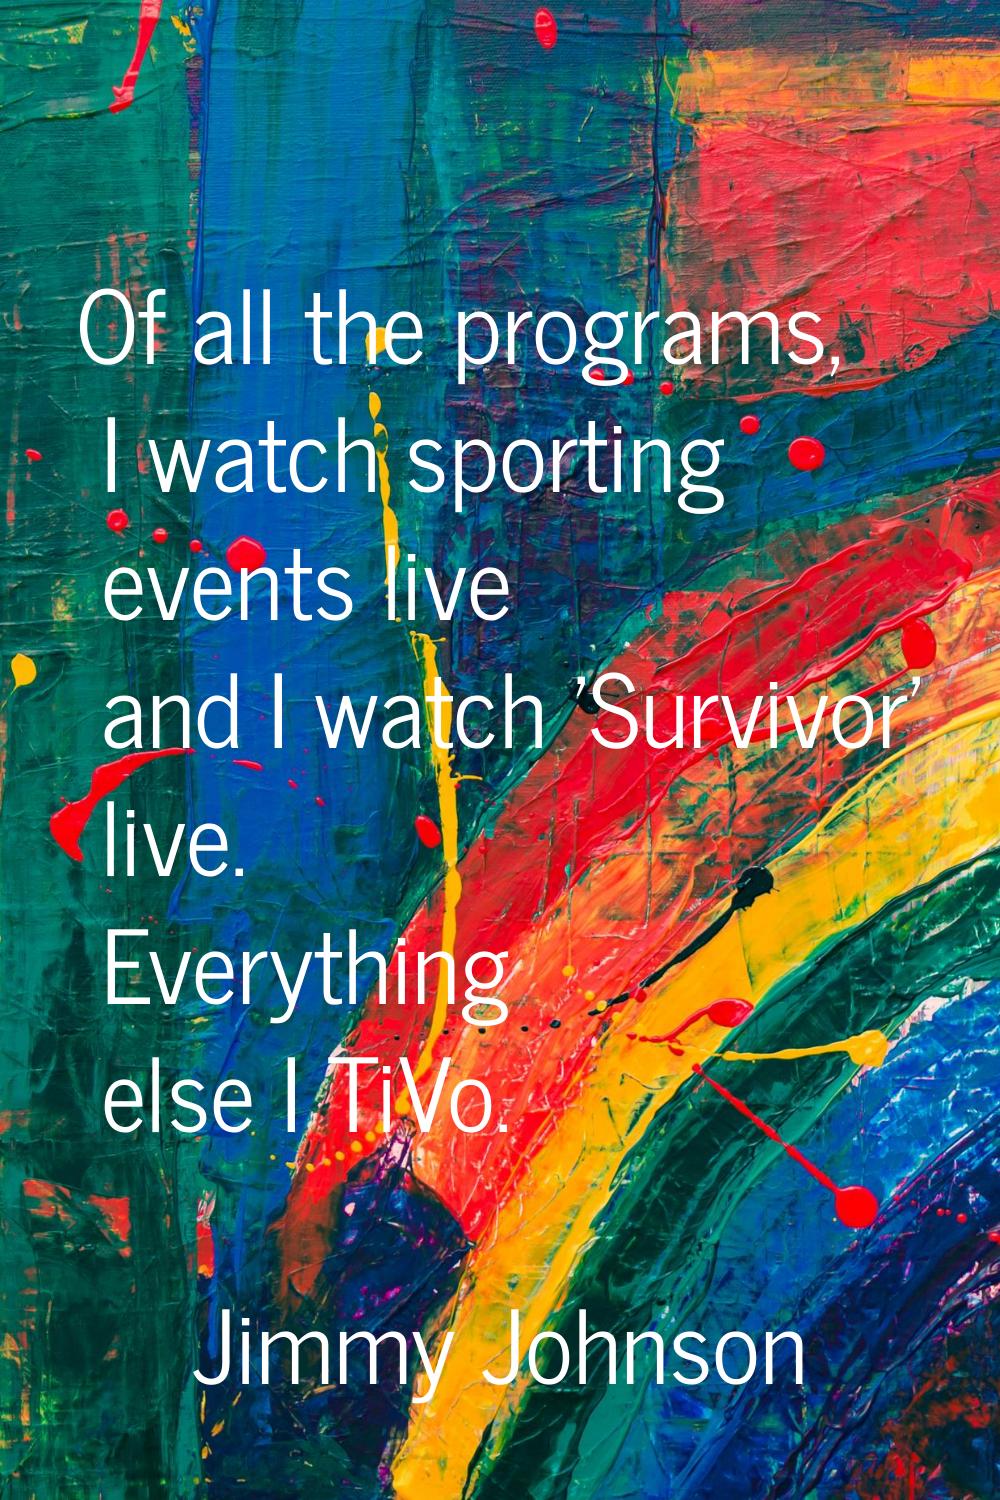 Of all the programs, I watch sporting events live and I watch 'Survivor' live. Everything else I Ti